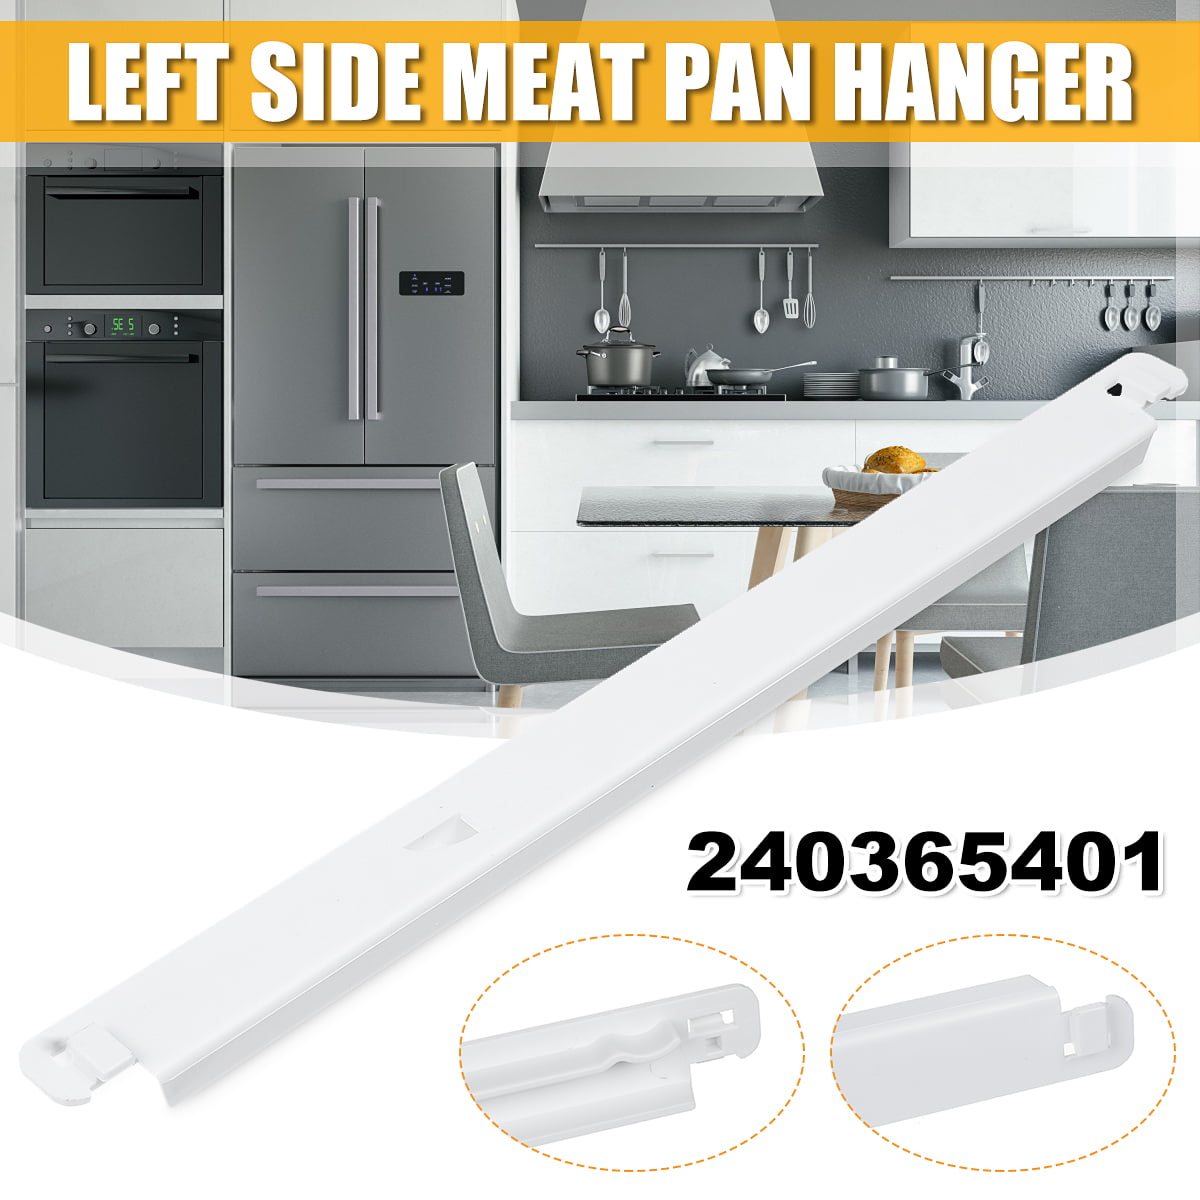 Right Details about    Meat Pan Hanger Track Fits Frigidaire Refrigerator 240356501 US 